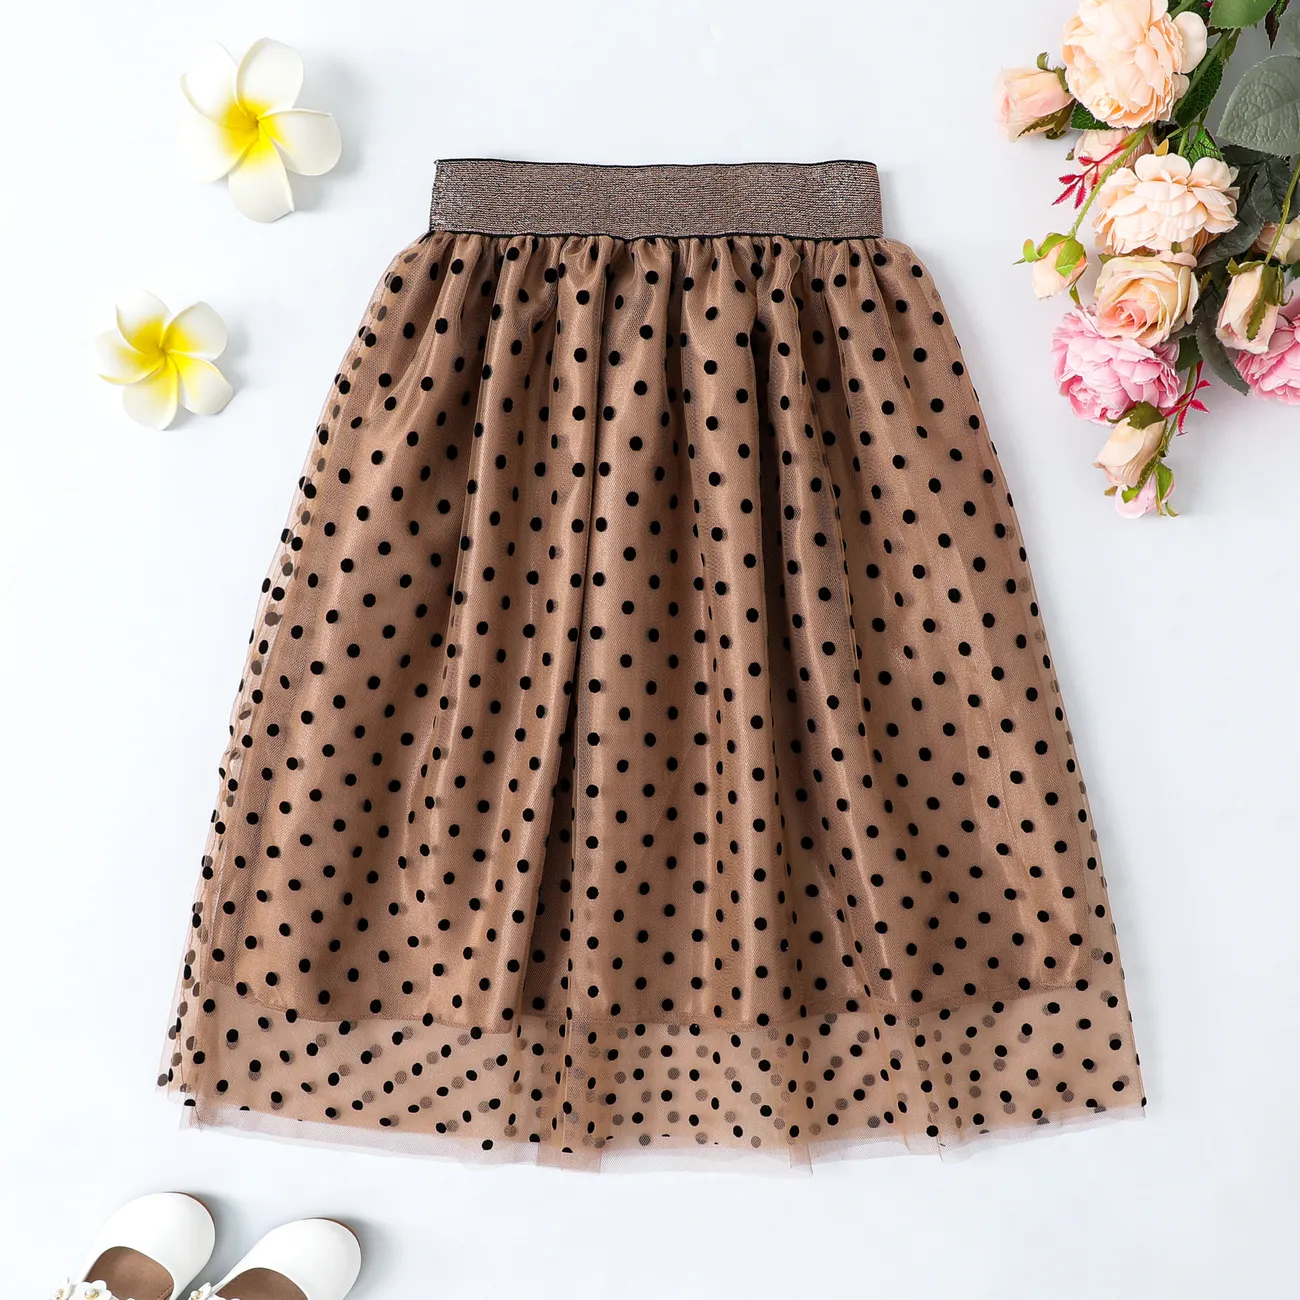 Sweet Polka Dot Multi-layered Skirt for Girls - Oversized Polyester Clothes Set Brown big image 1